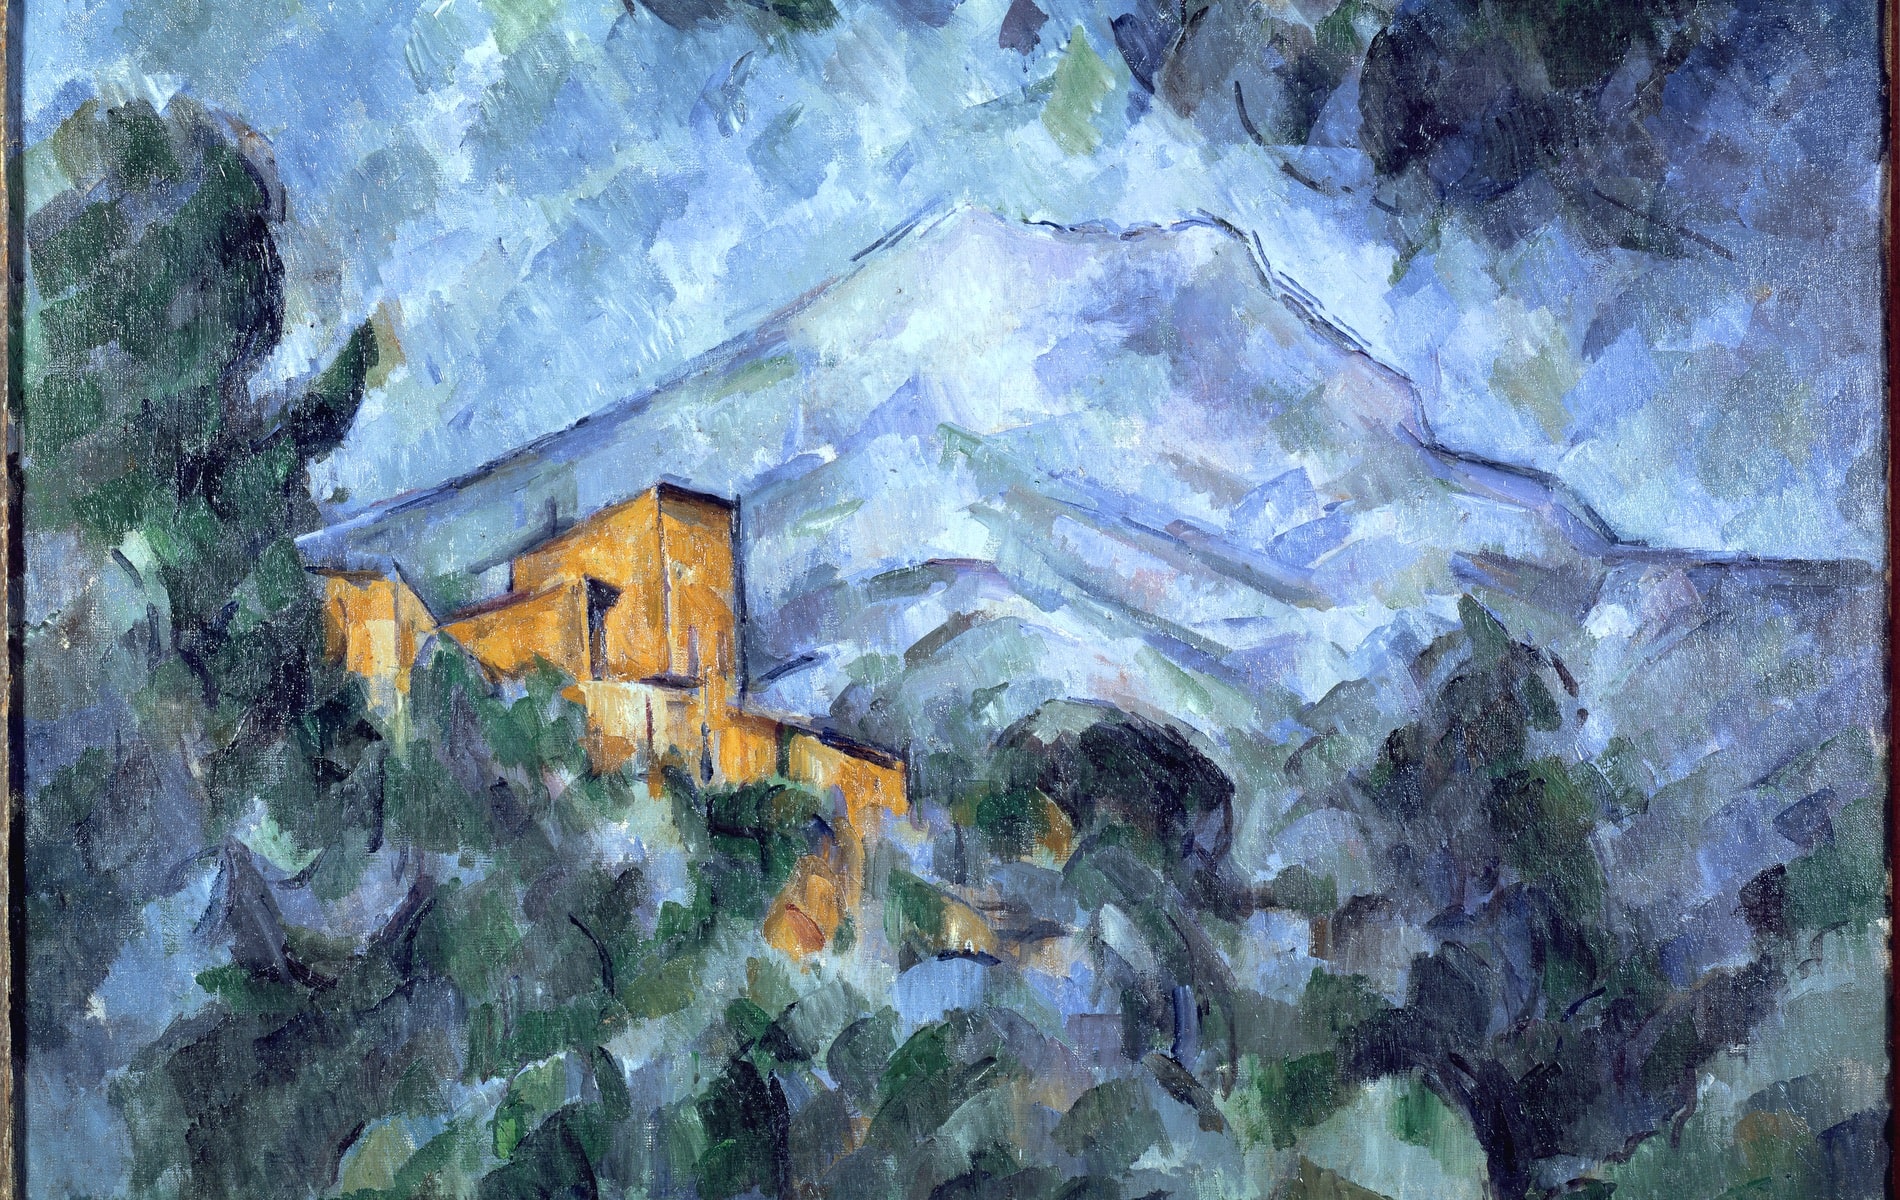 Visual Perspectives – Cezanne